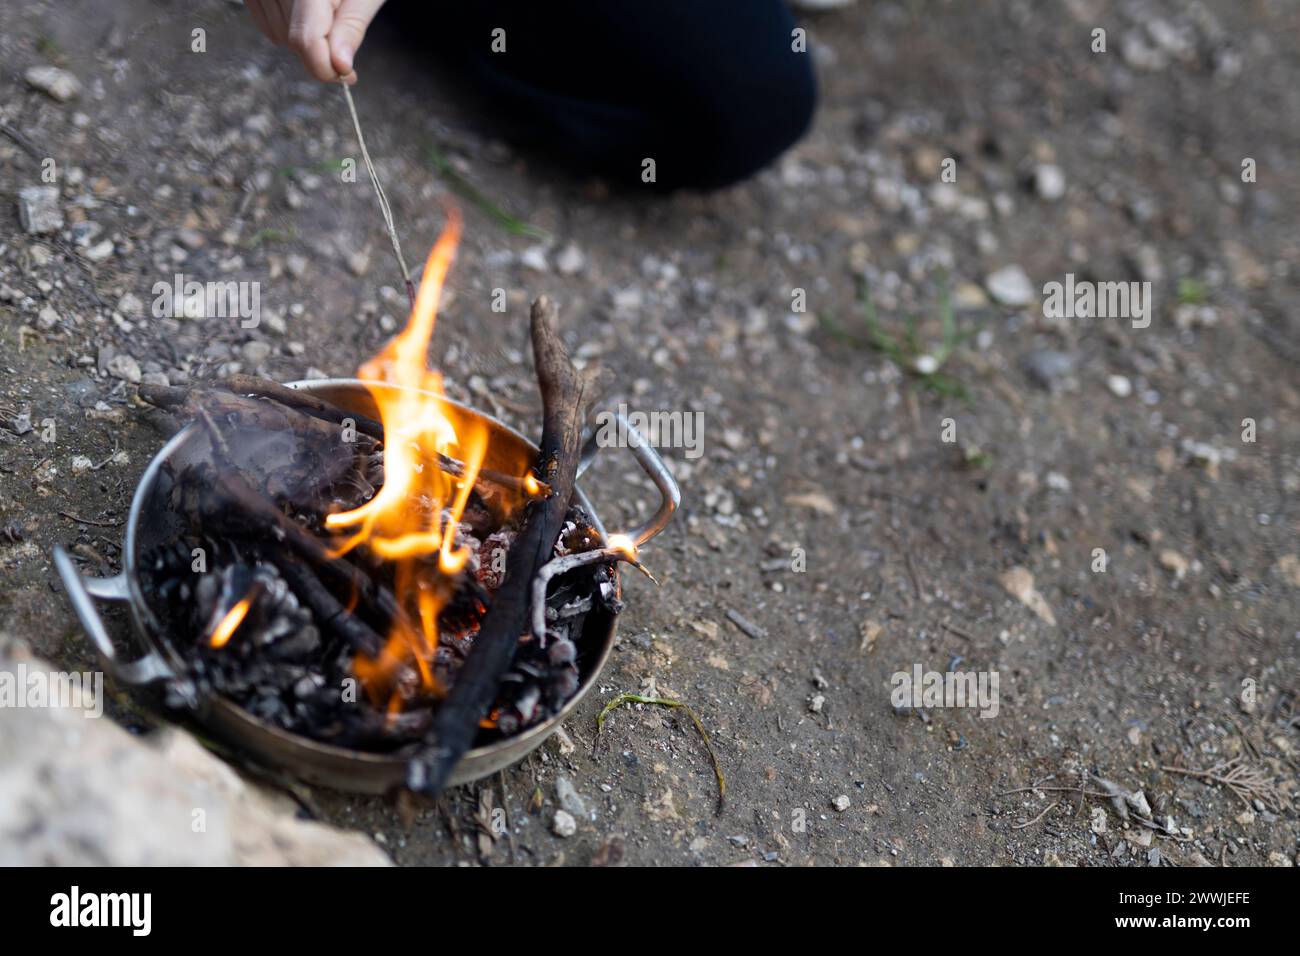 Fire lit in a tin bowl and a child's hand with a burning stick Stock Photo